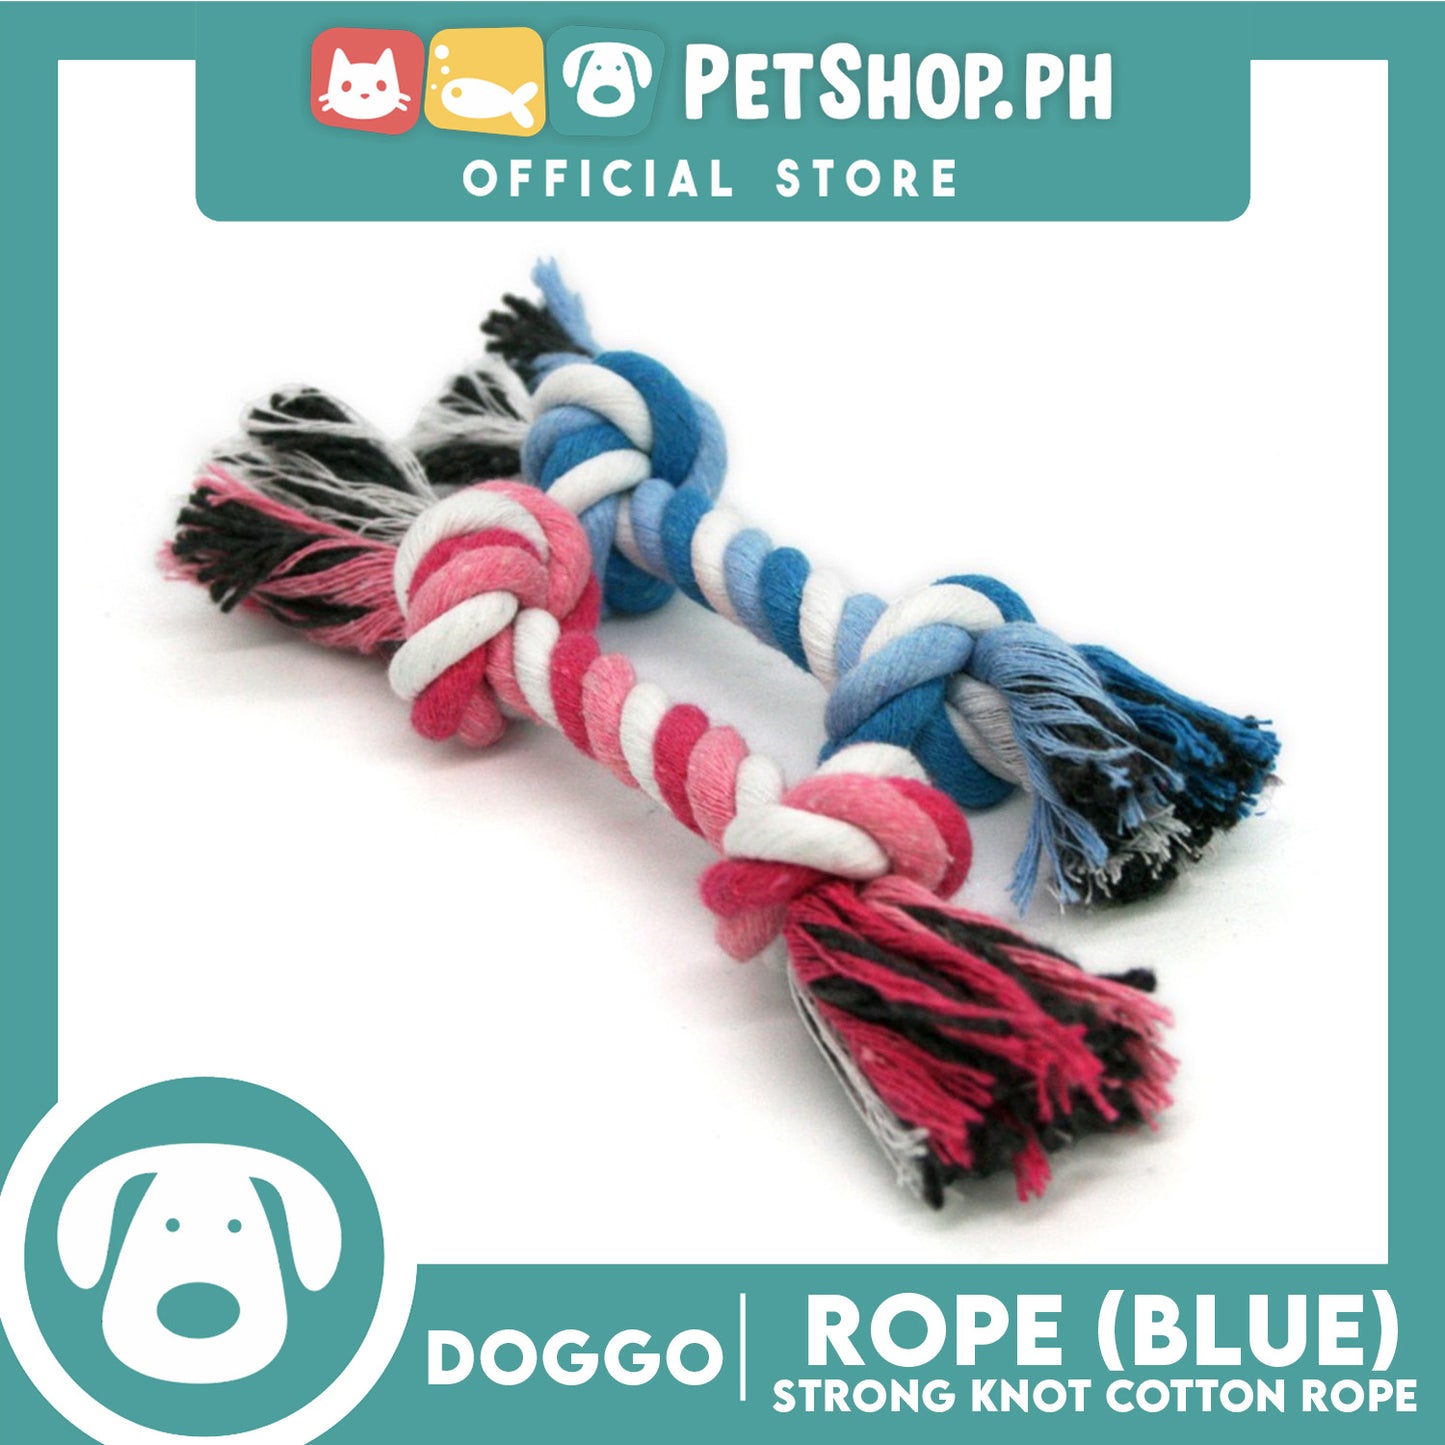 Doggo Rope Thick Fiber 4' ' Extra Small Size (Blue) Perfect Toy for Dog